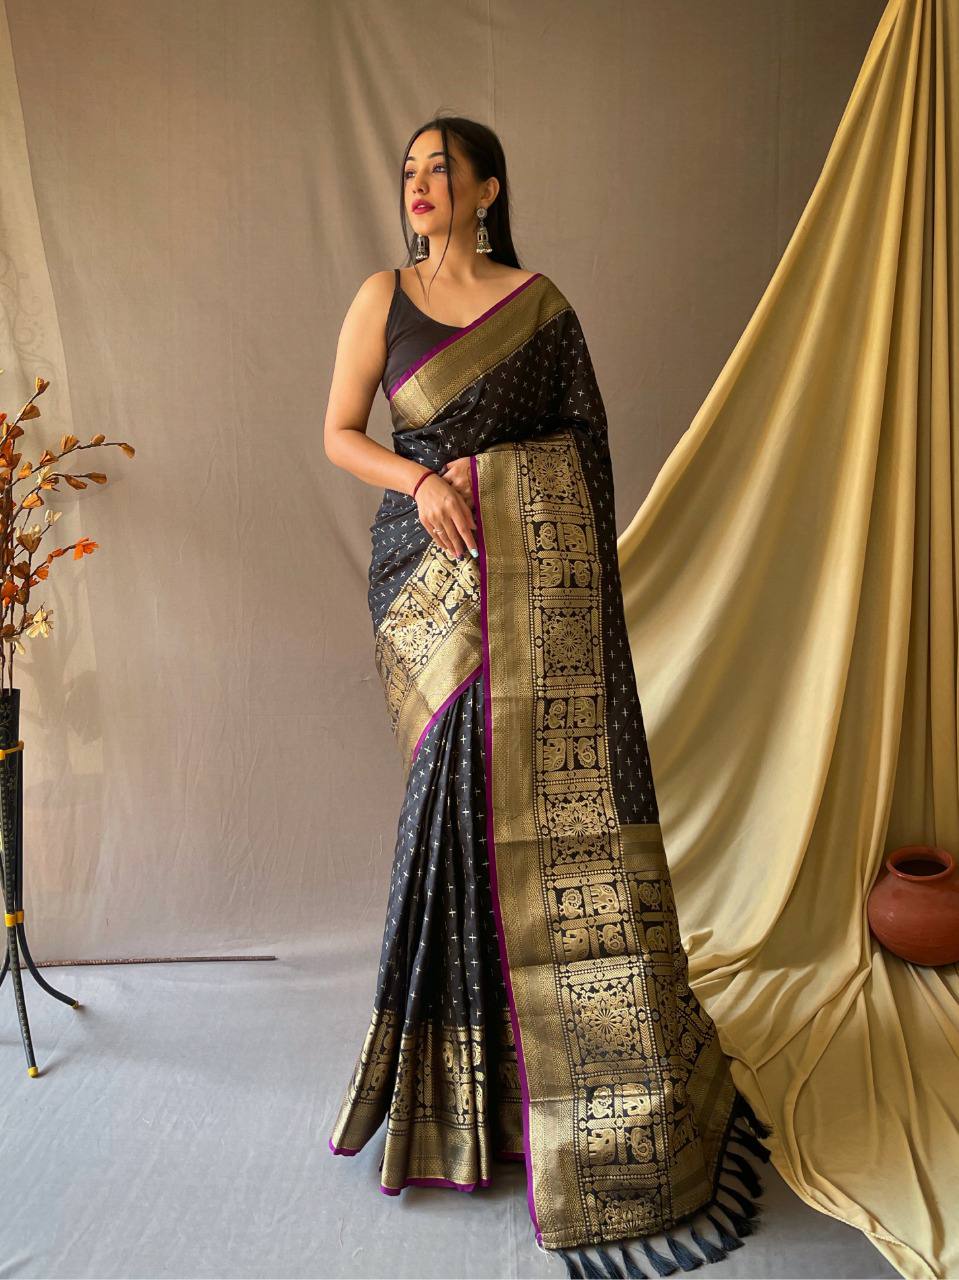 SUPERB ANTIQUE WEAVING USED IN THIS HANDLOOM SAREES